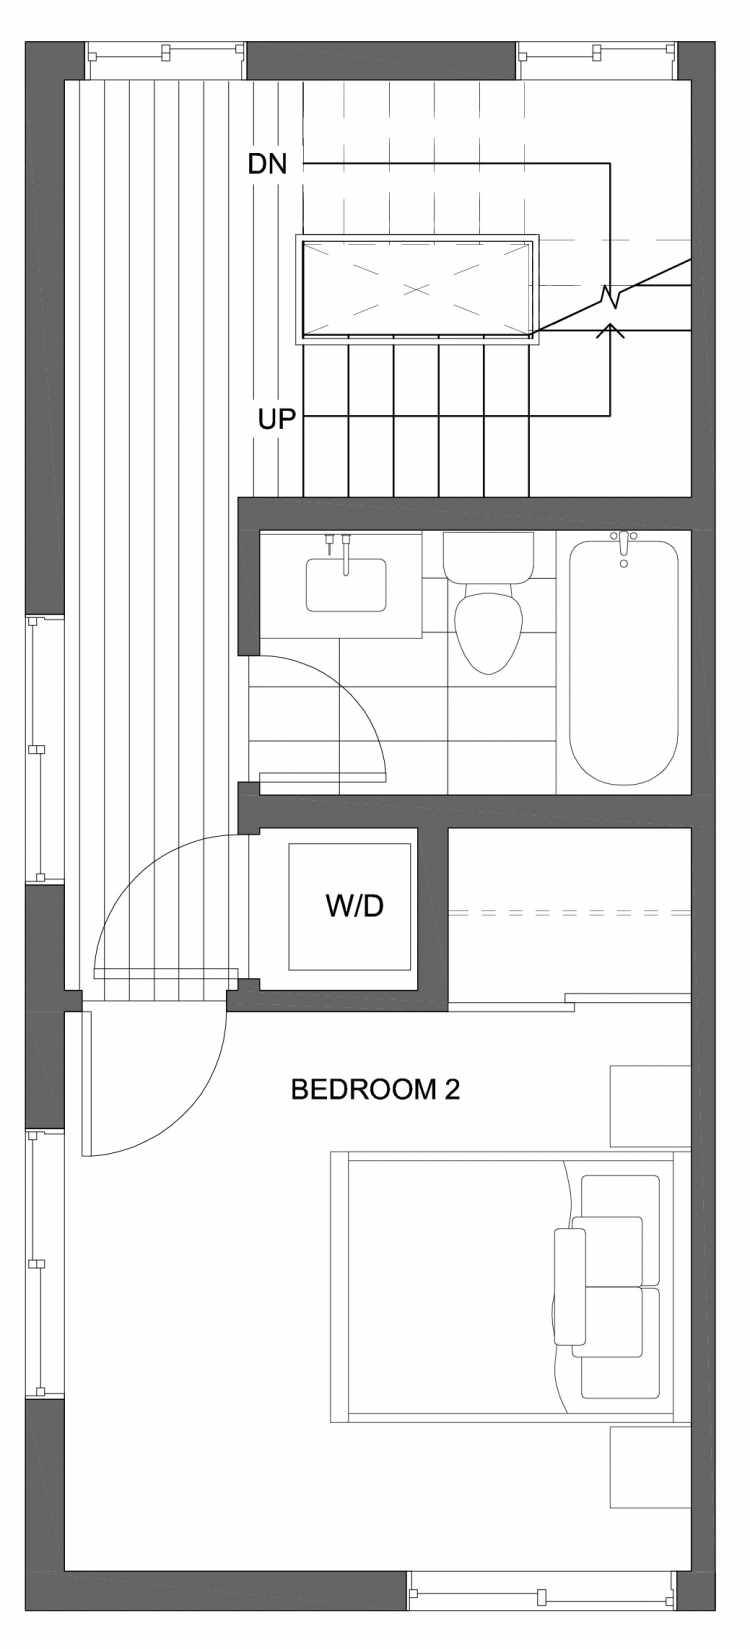 Second Floor Plan of 10429A Alderbrook Pl NW, One of the Jasmine Townhomes in the Greenwood Neighborhood of Seattle